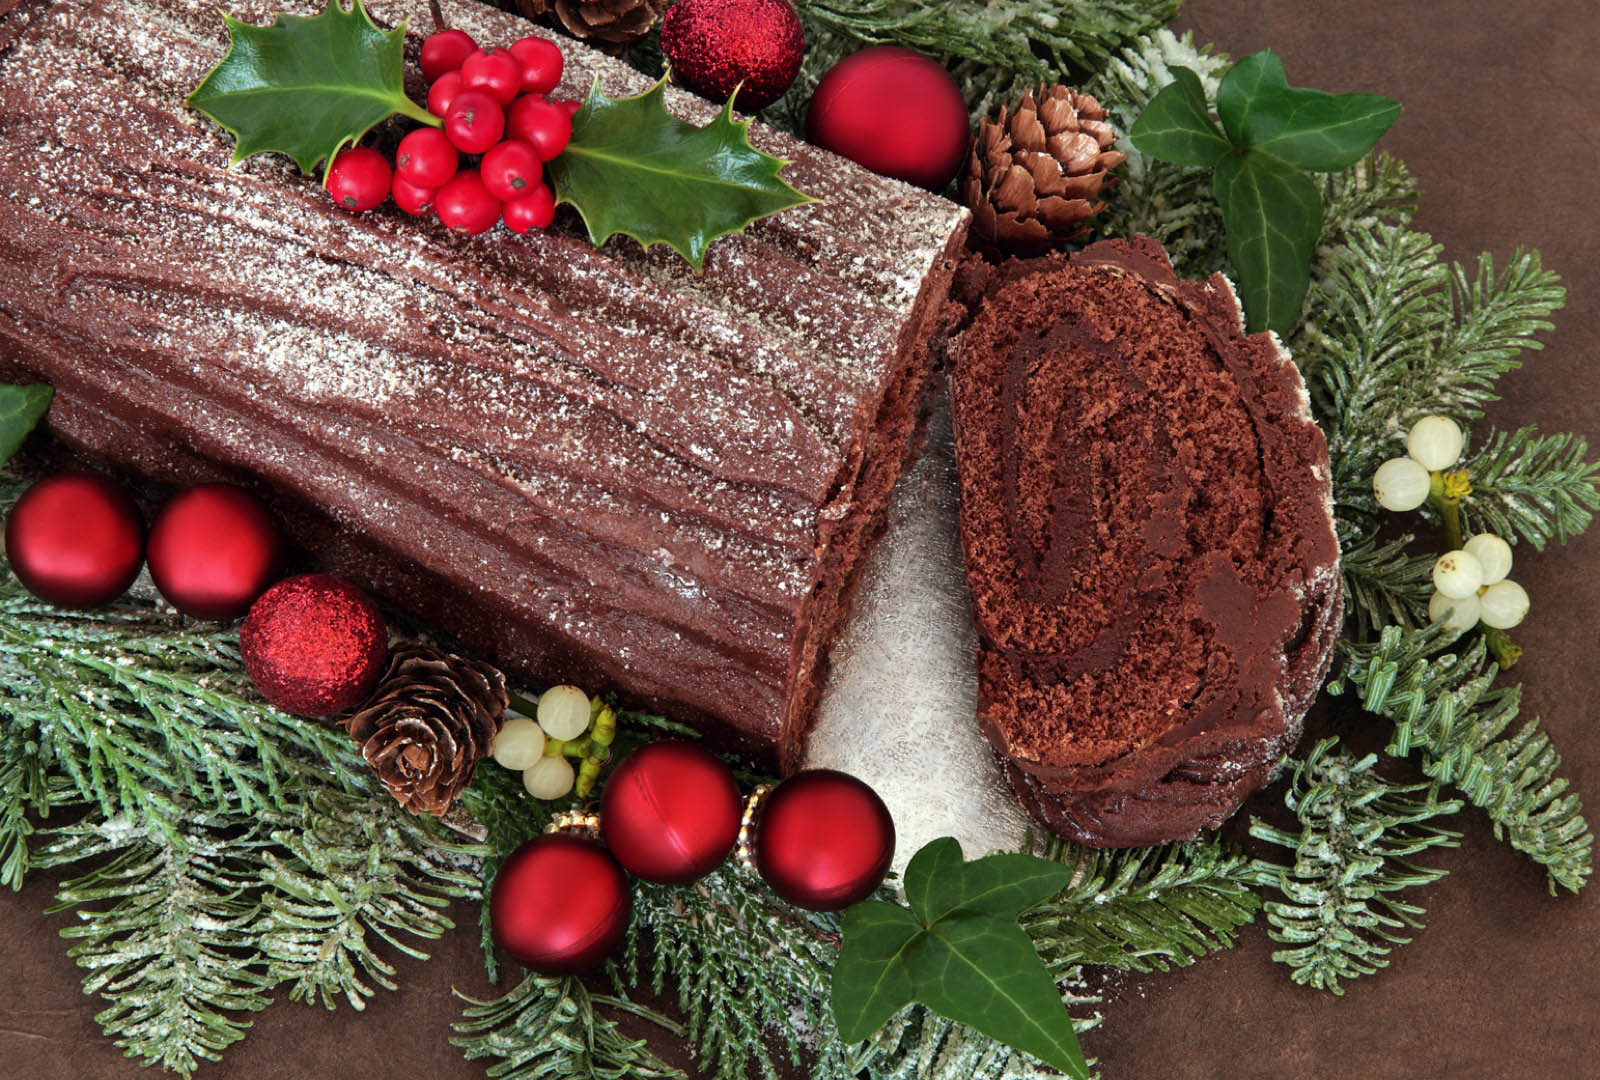 🍰 We’re Pretty Sure We Know Your Birth Month Based on the Cakes You’ve Eaten Christmas Yule Log Cake